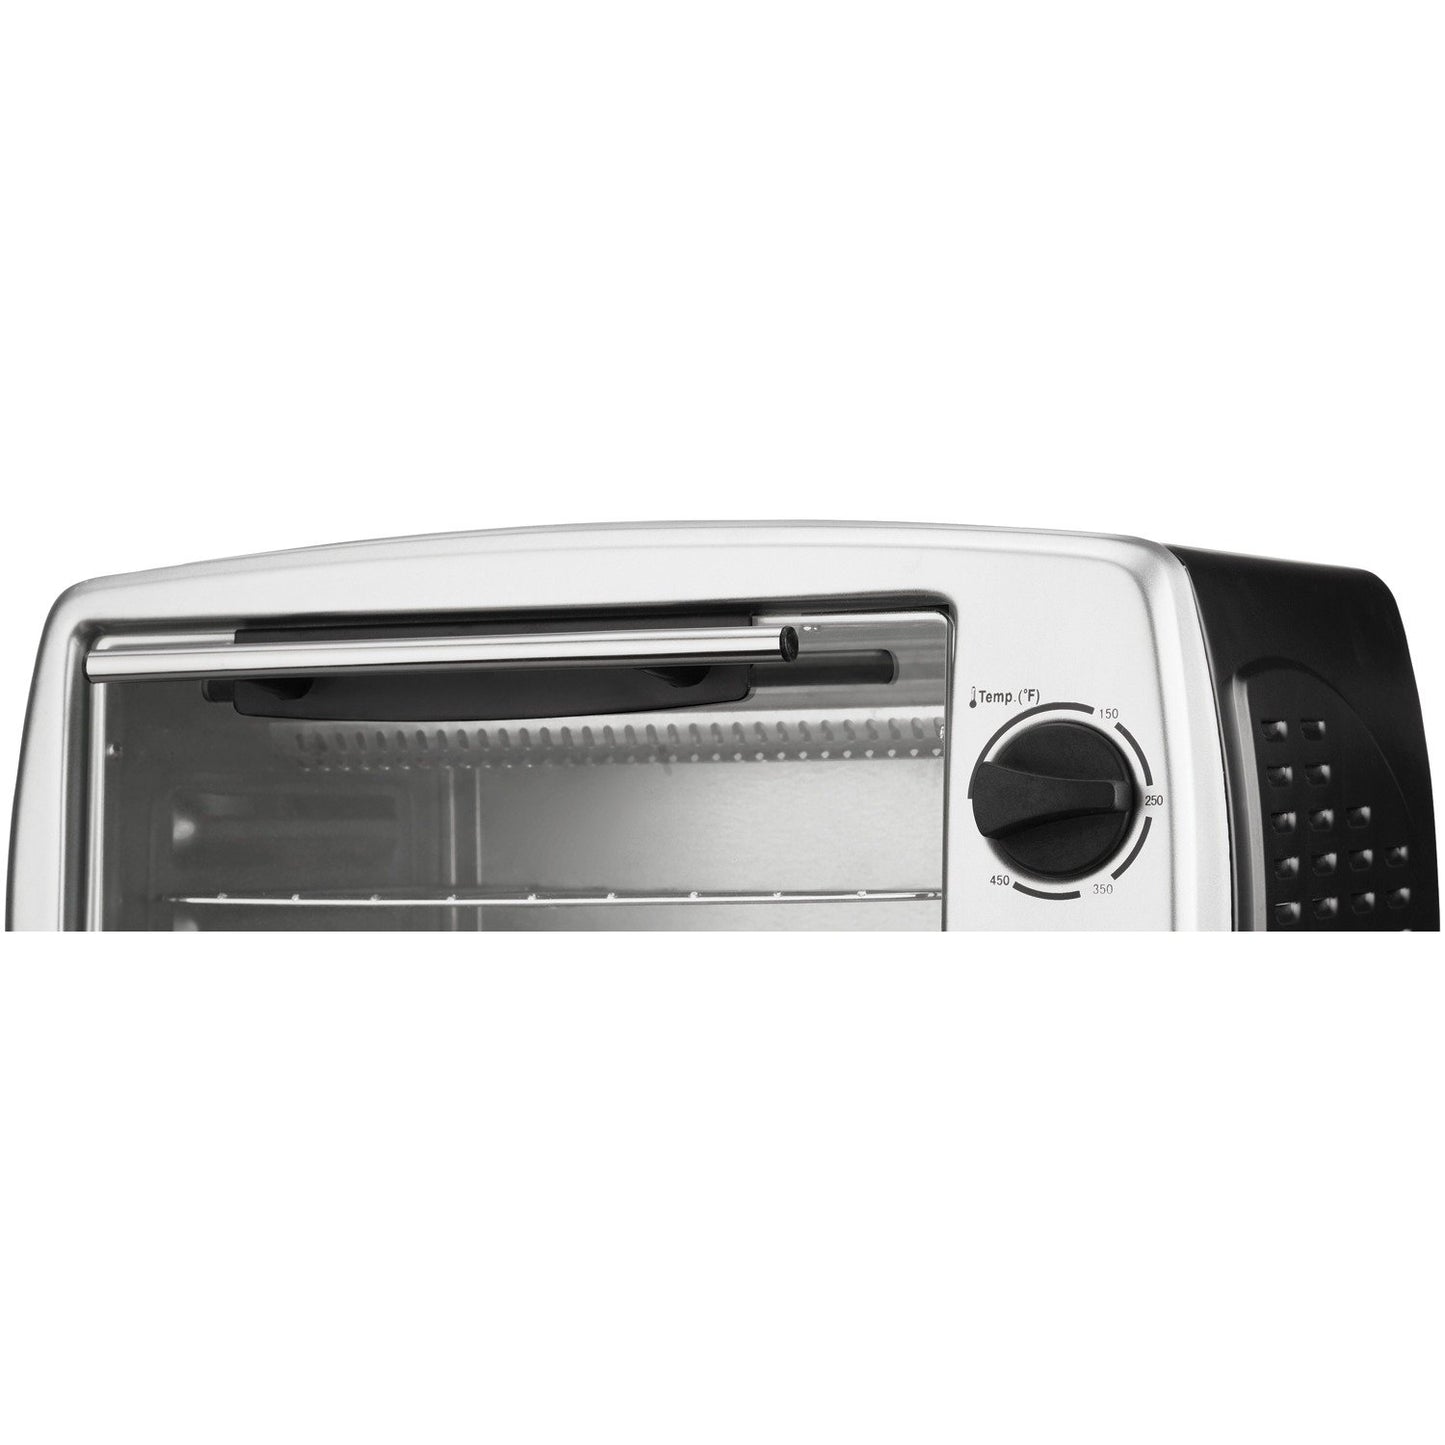 Brentwood Appl. TS-345B 4-Slice Toaster Oven and Broiler (Black)